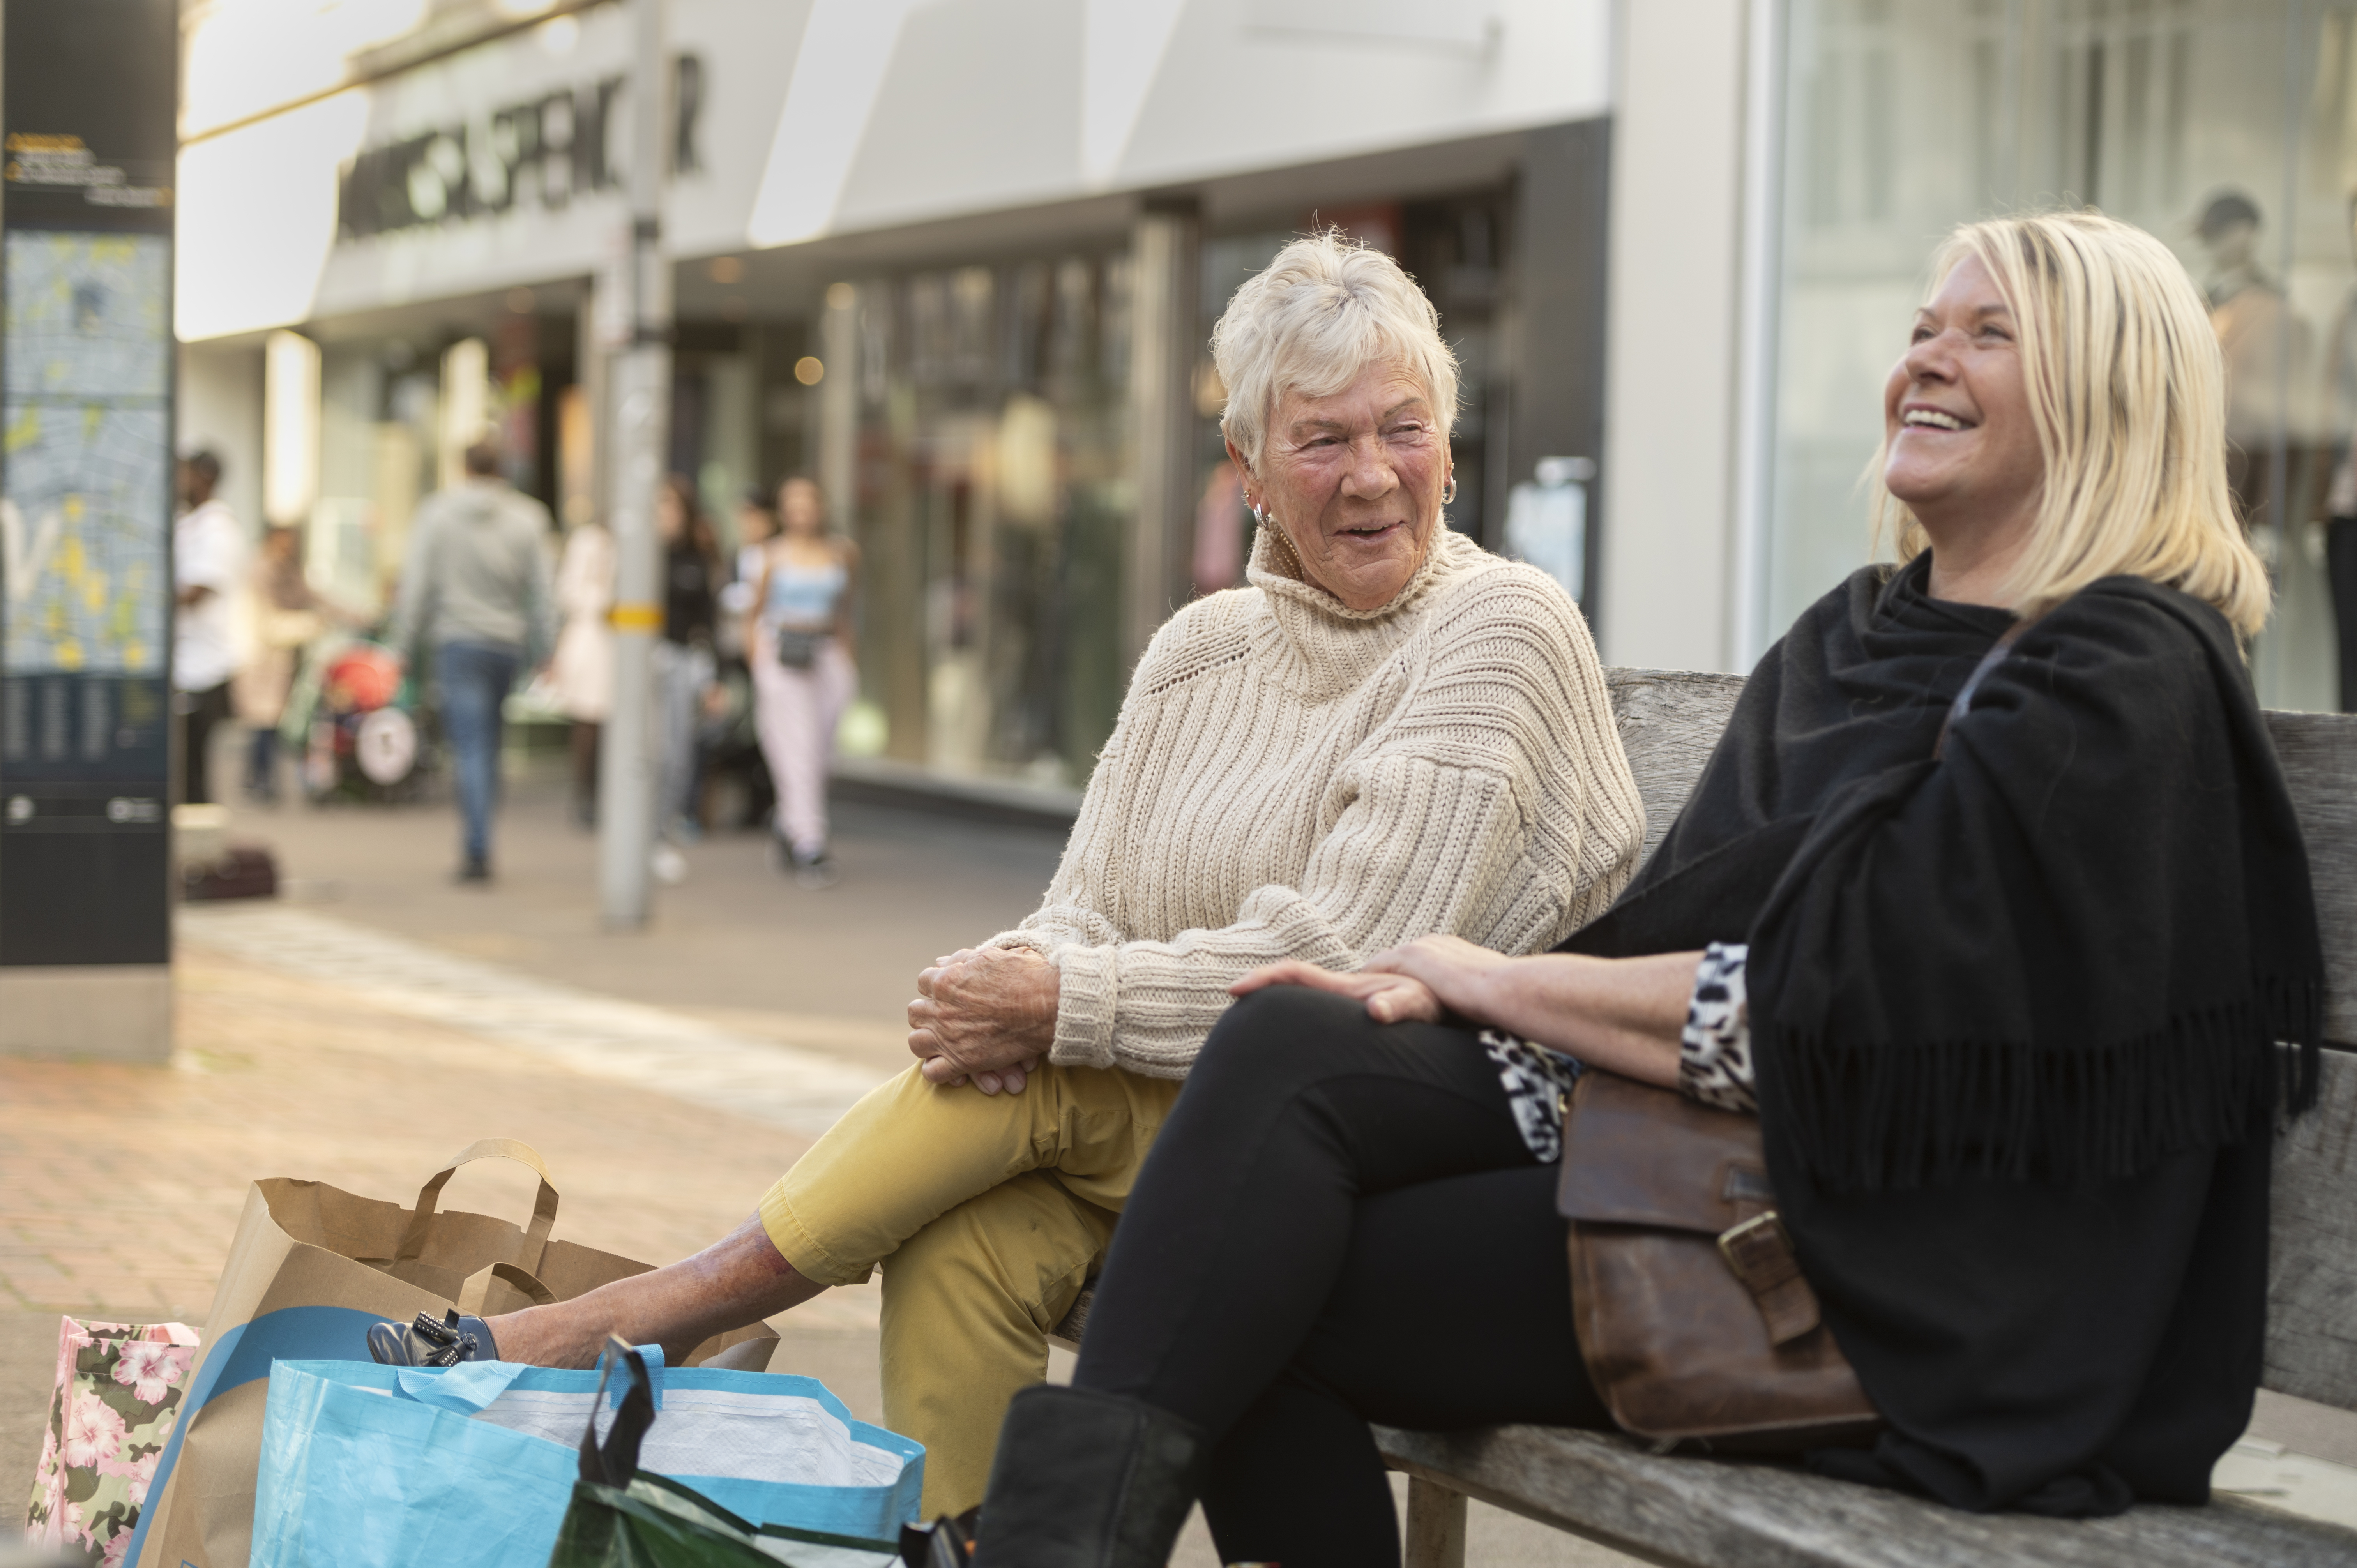 Two women sitting on a benching in Sutton highstreet laughing